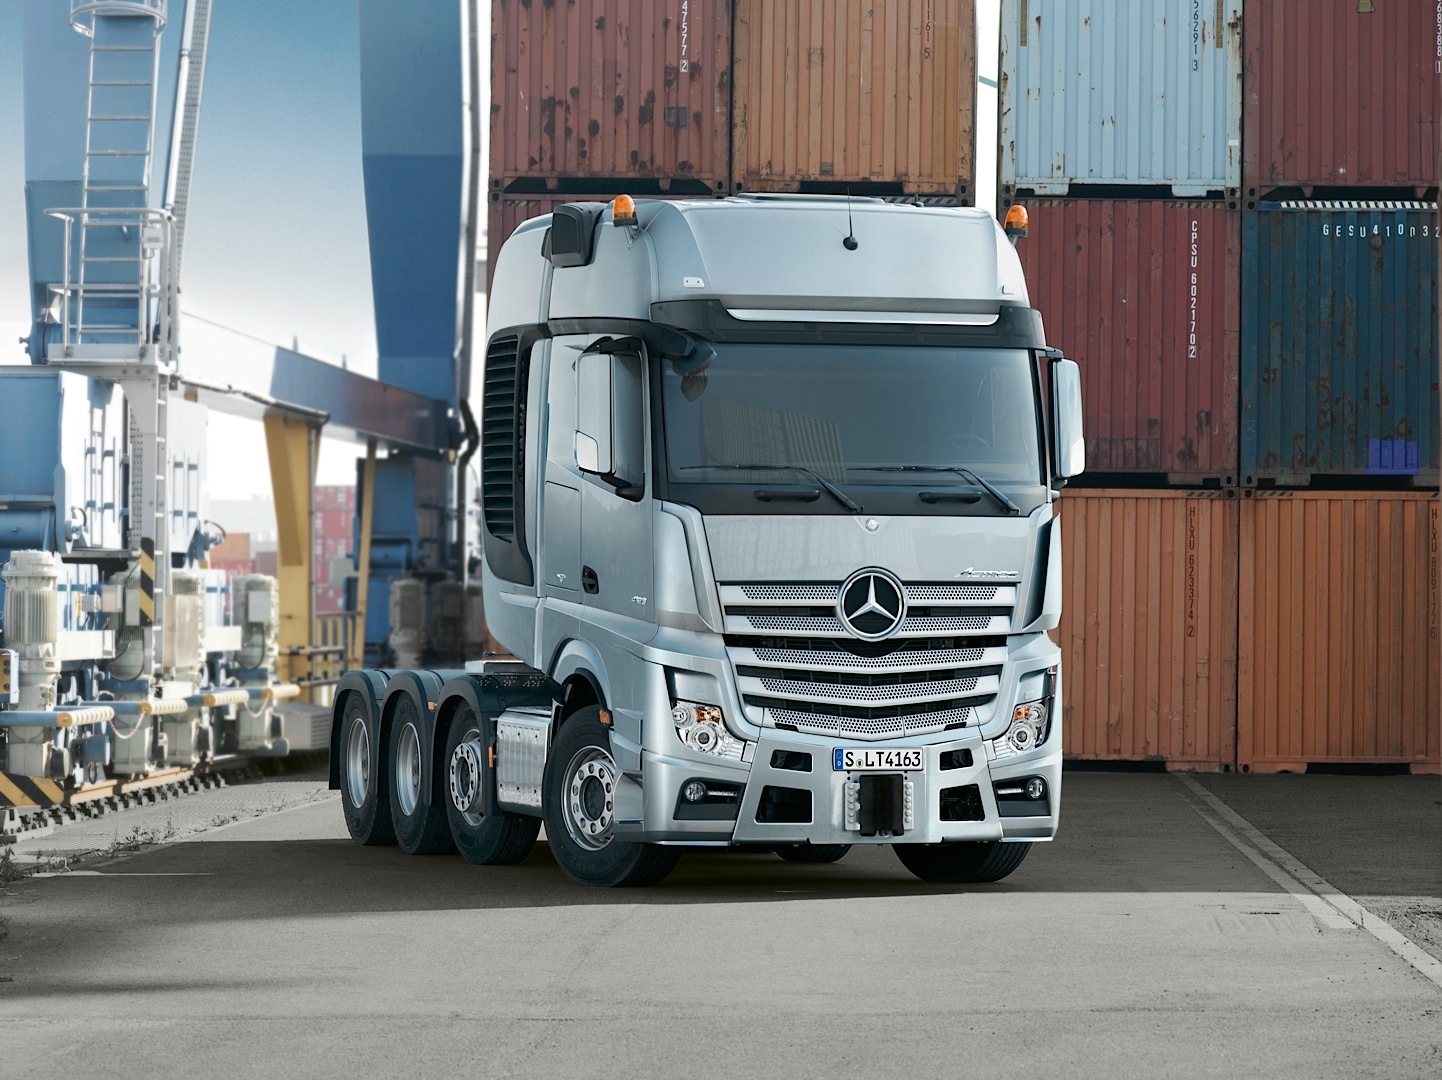 Mercedes Benz Actros Wallpapers Vehicles Hq Mercedes Benz Actros Pictures 4k Wallpapers 2019